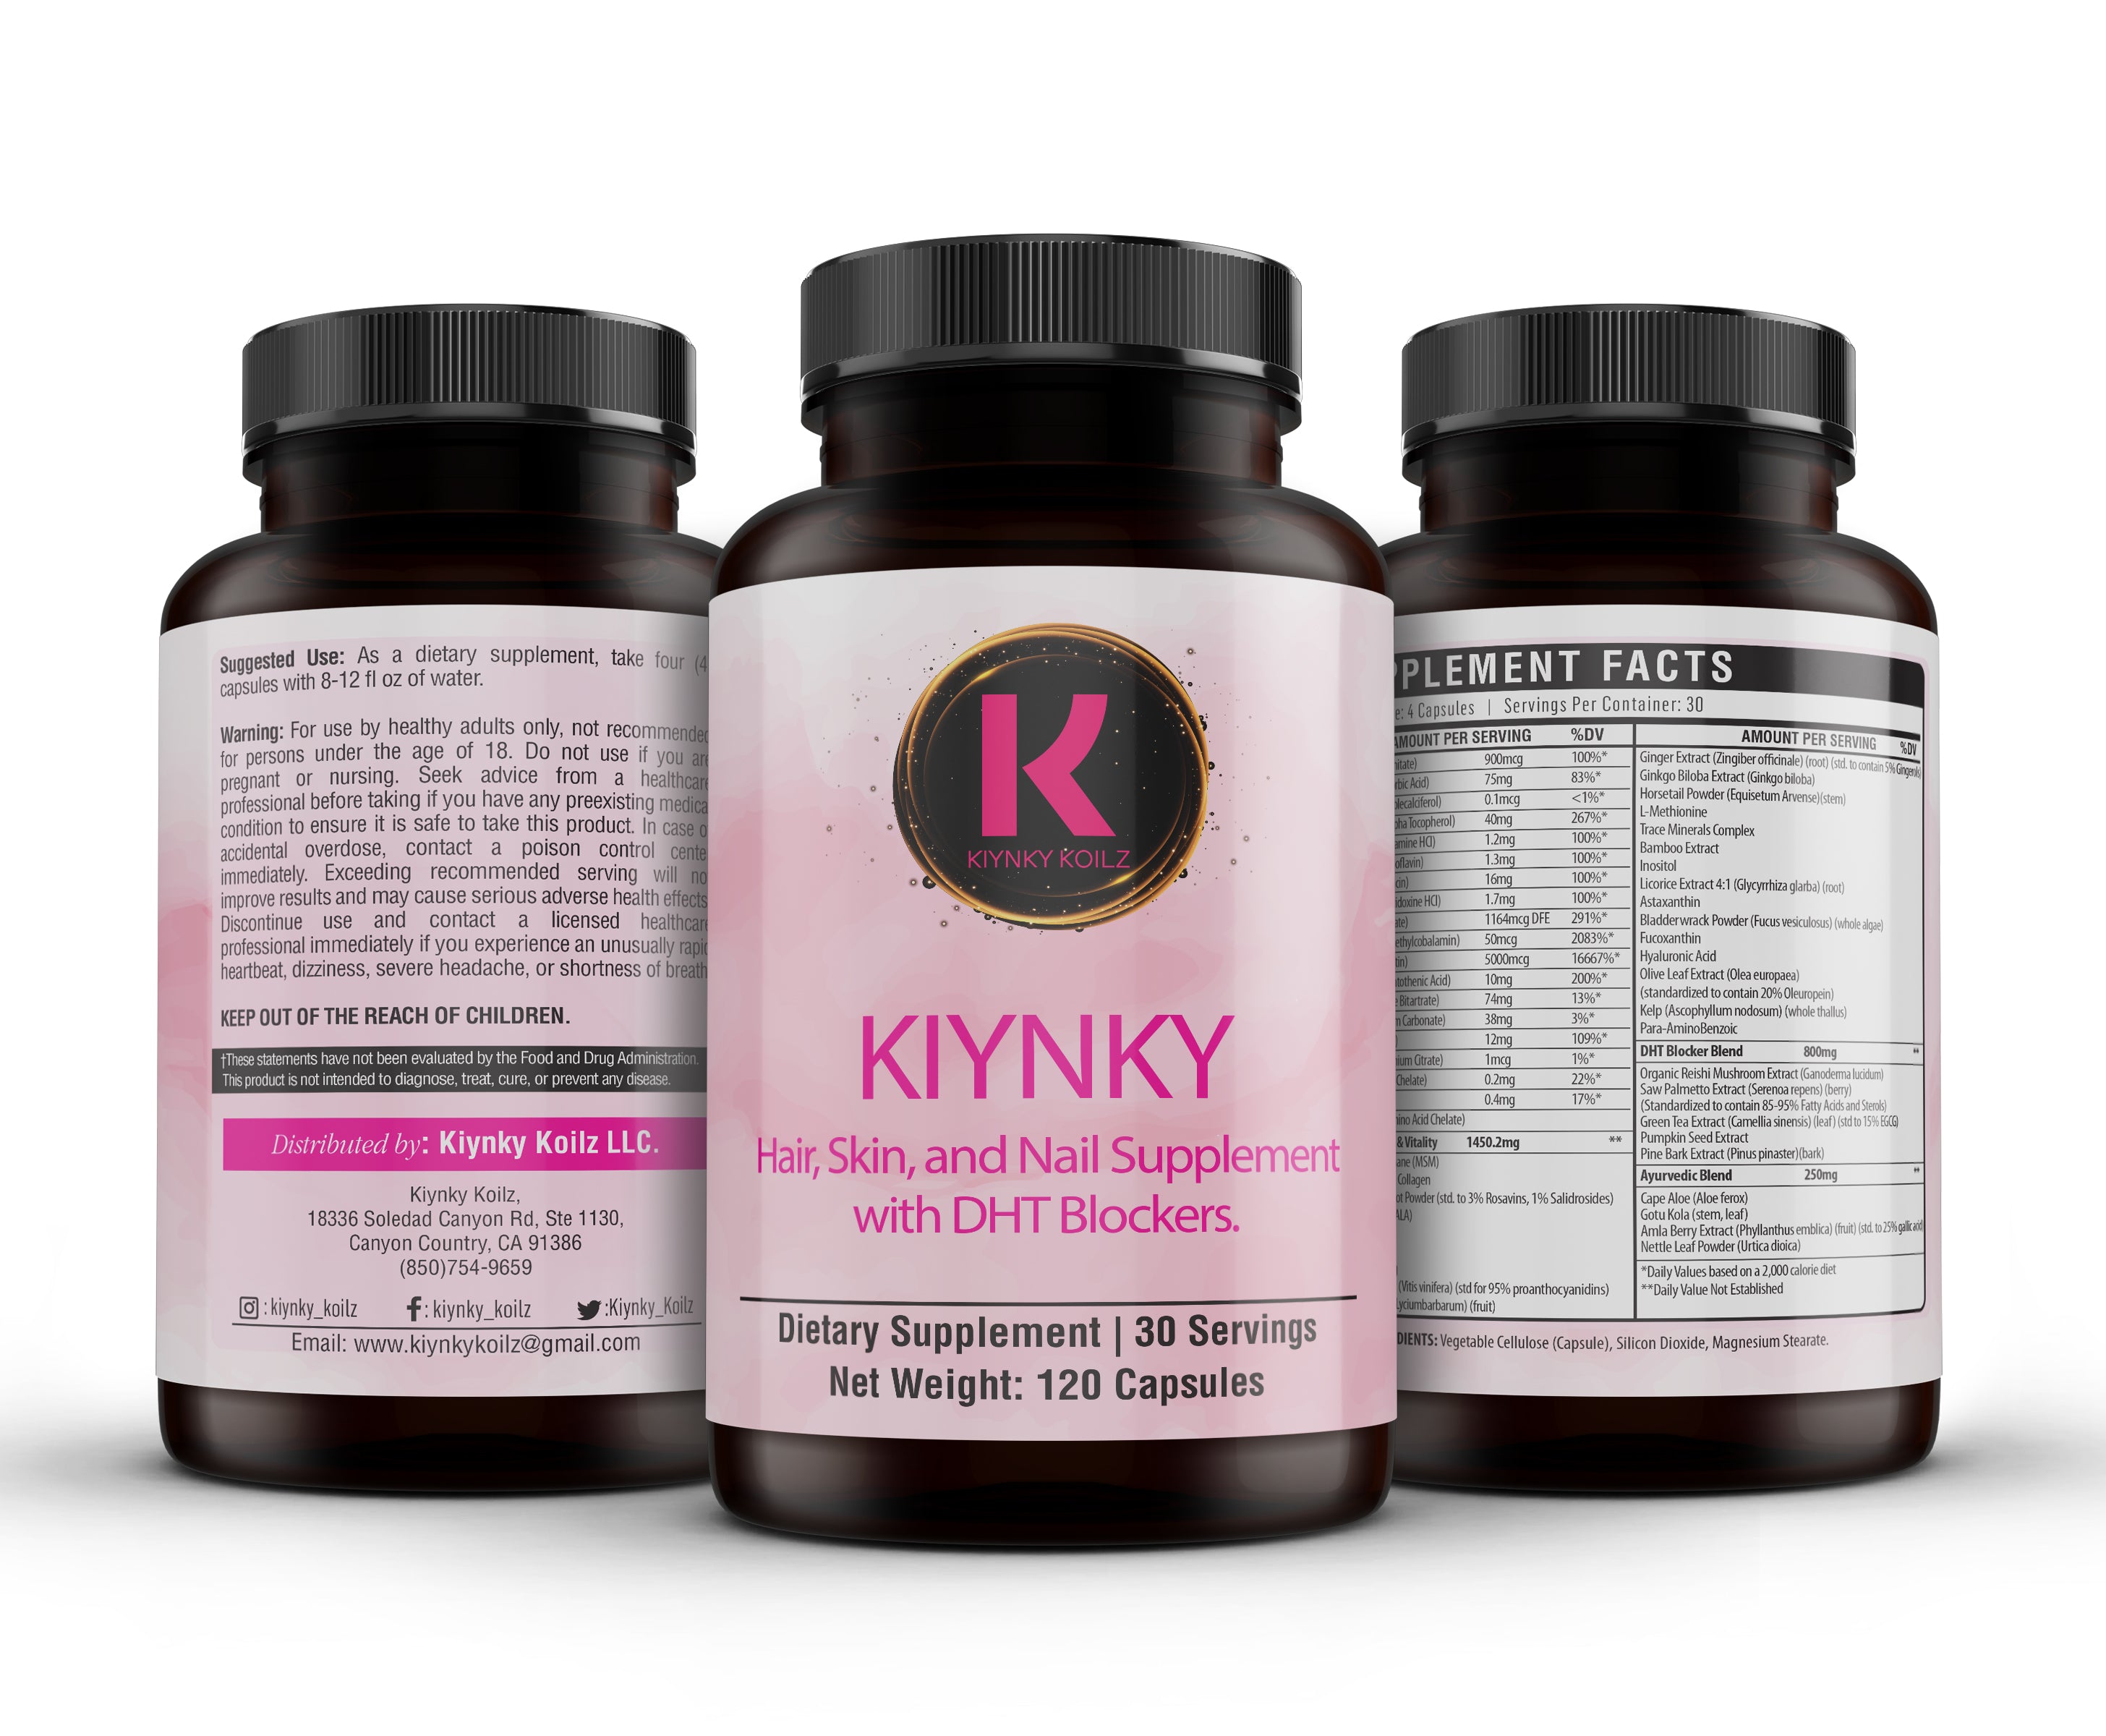 KIYNKY Hair, Nail, and Skin Supplement with DHT Blockers